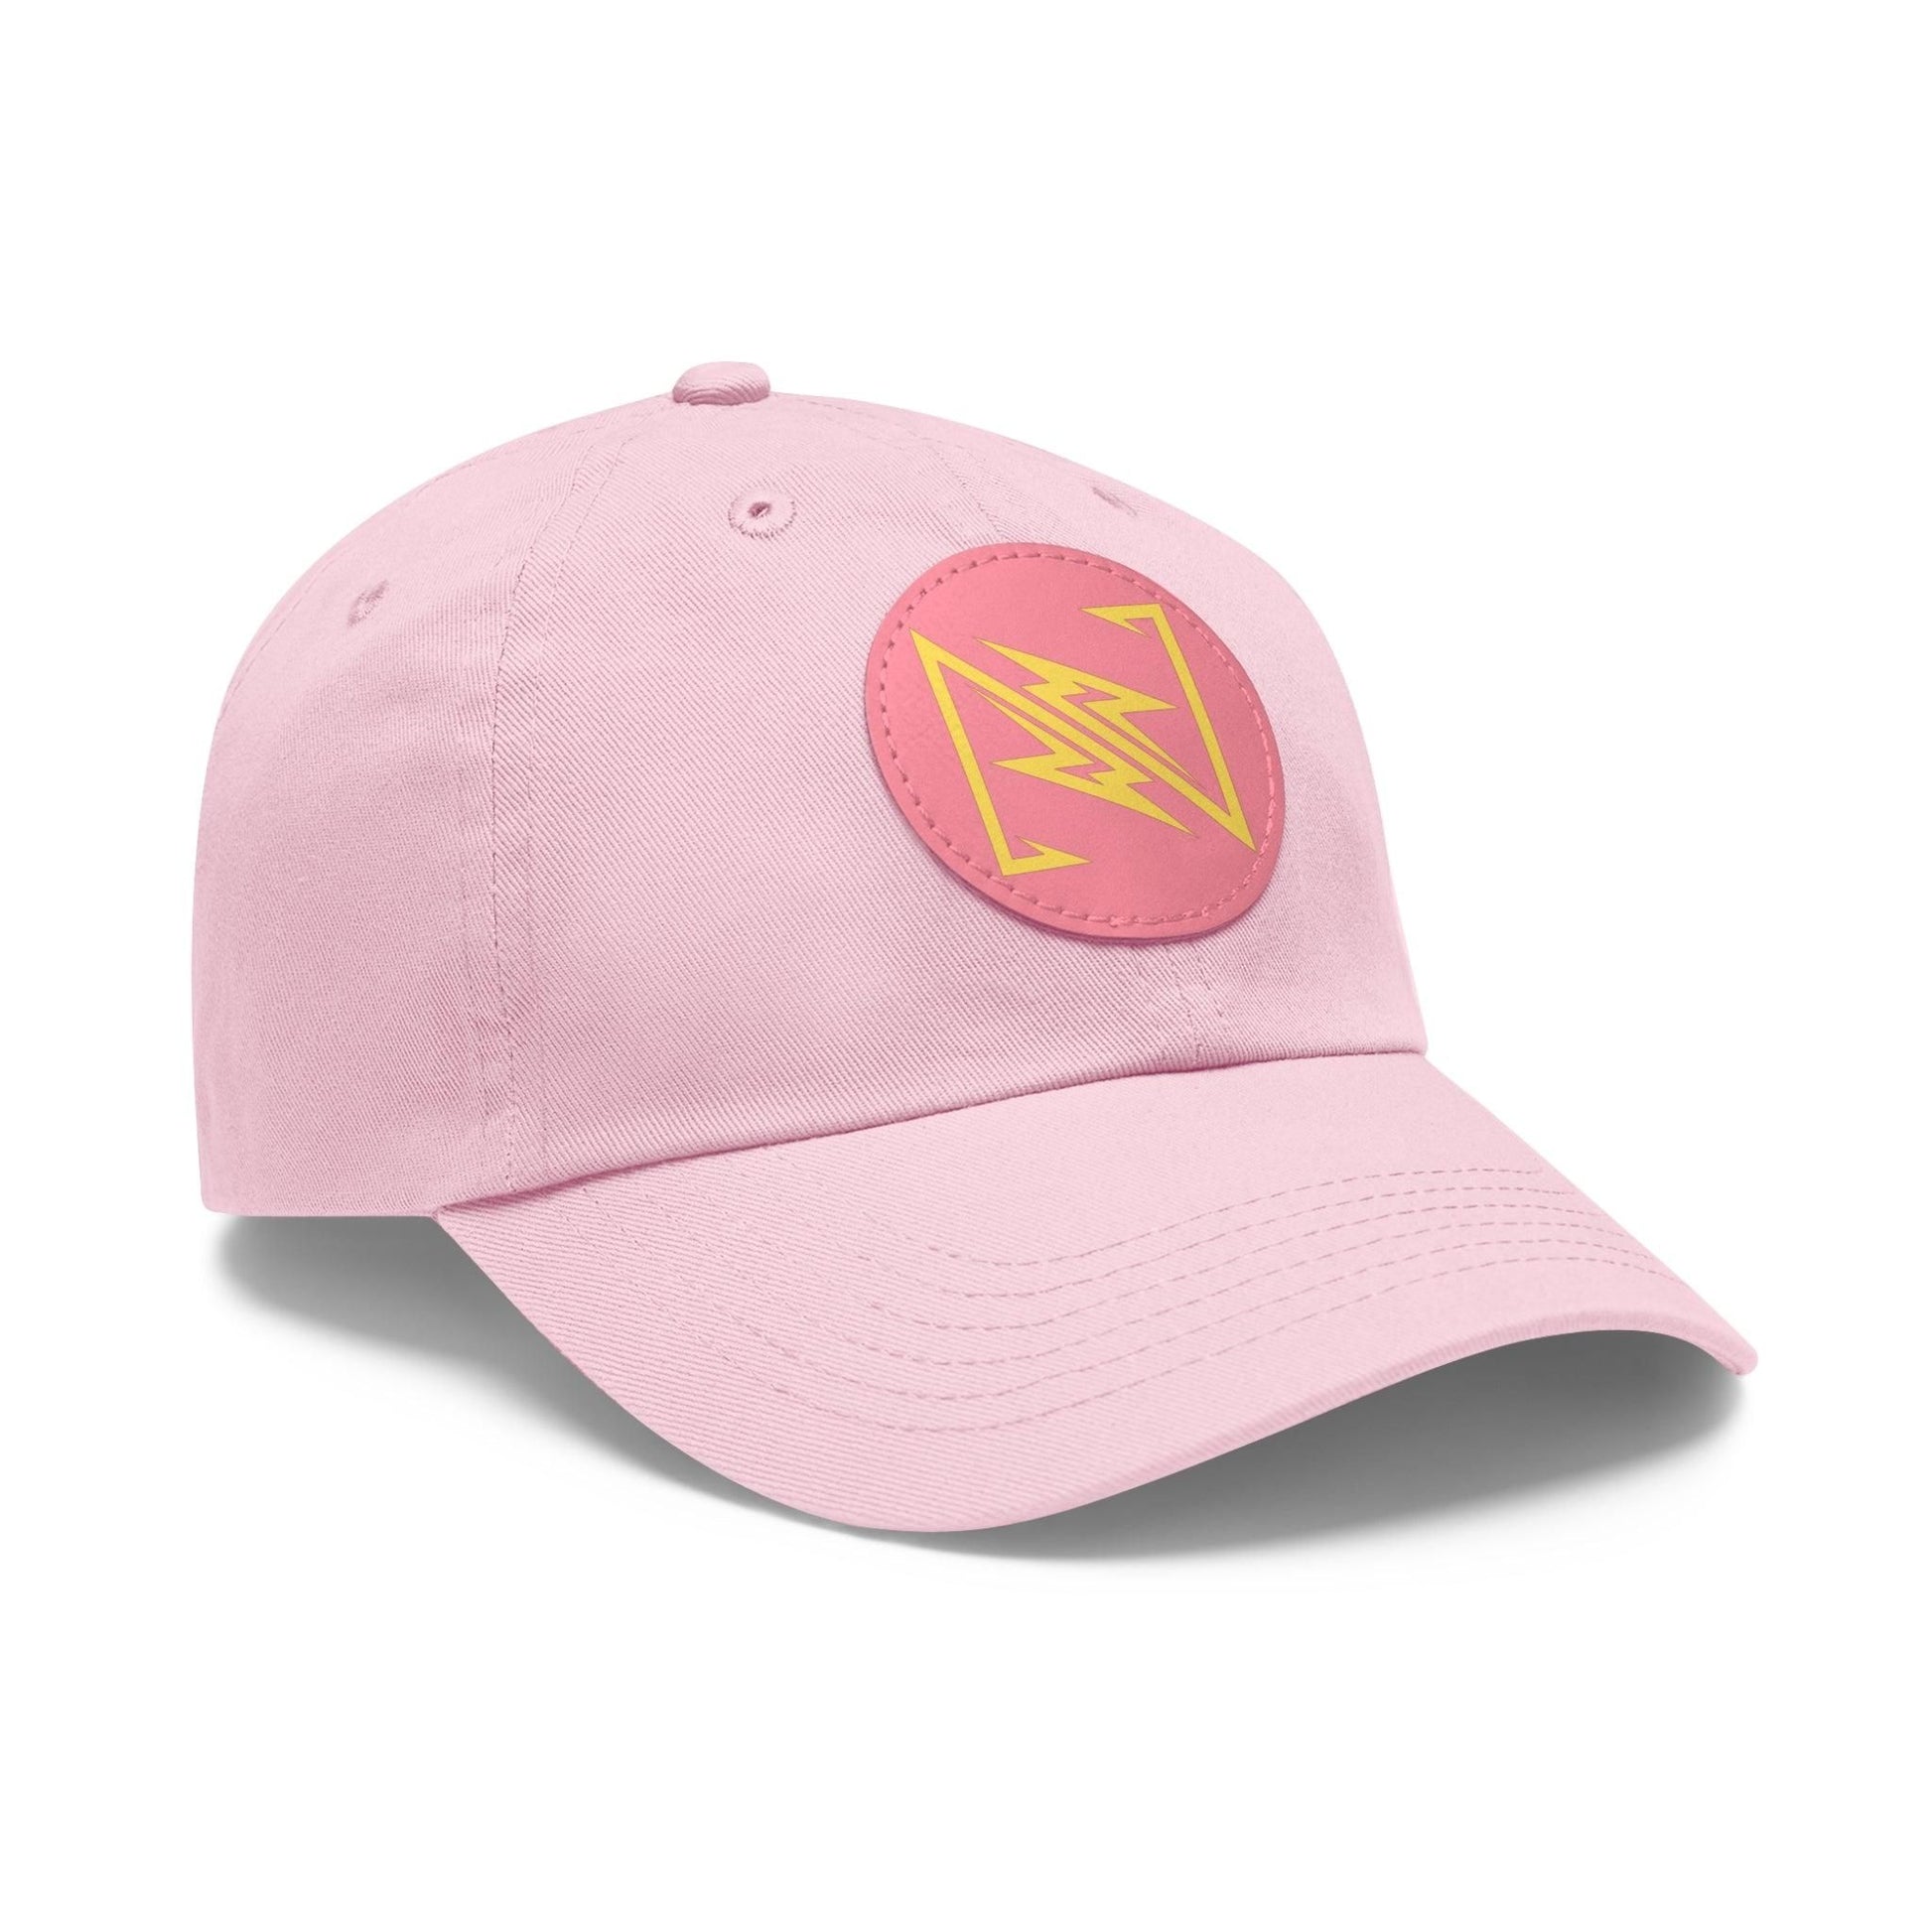 NX Vogue Baseball Hat with Leather Patch Cap Light Pink / Pink patch Circle One size